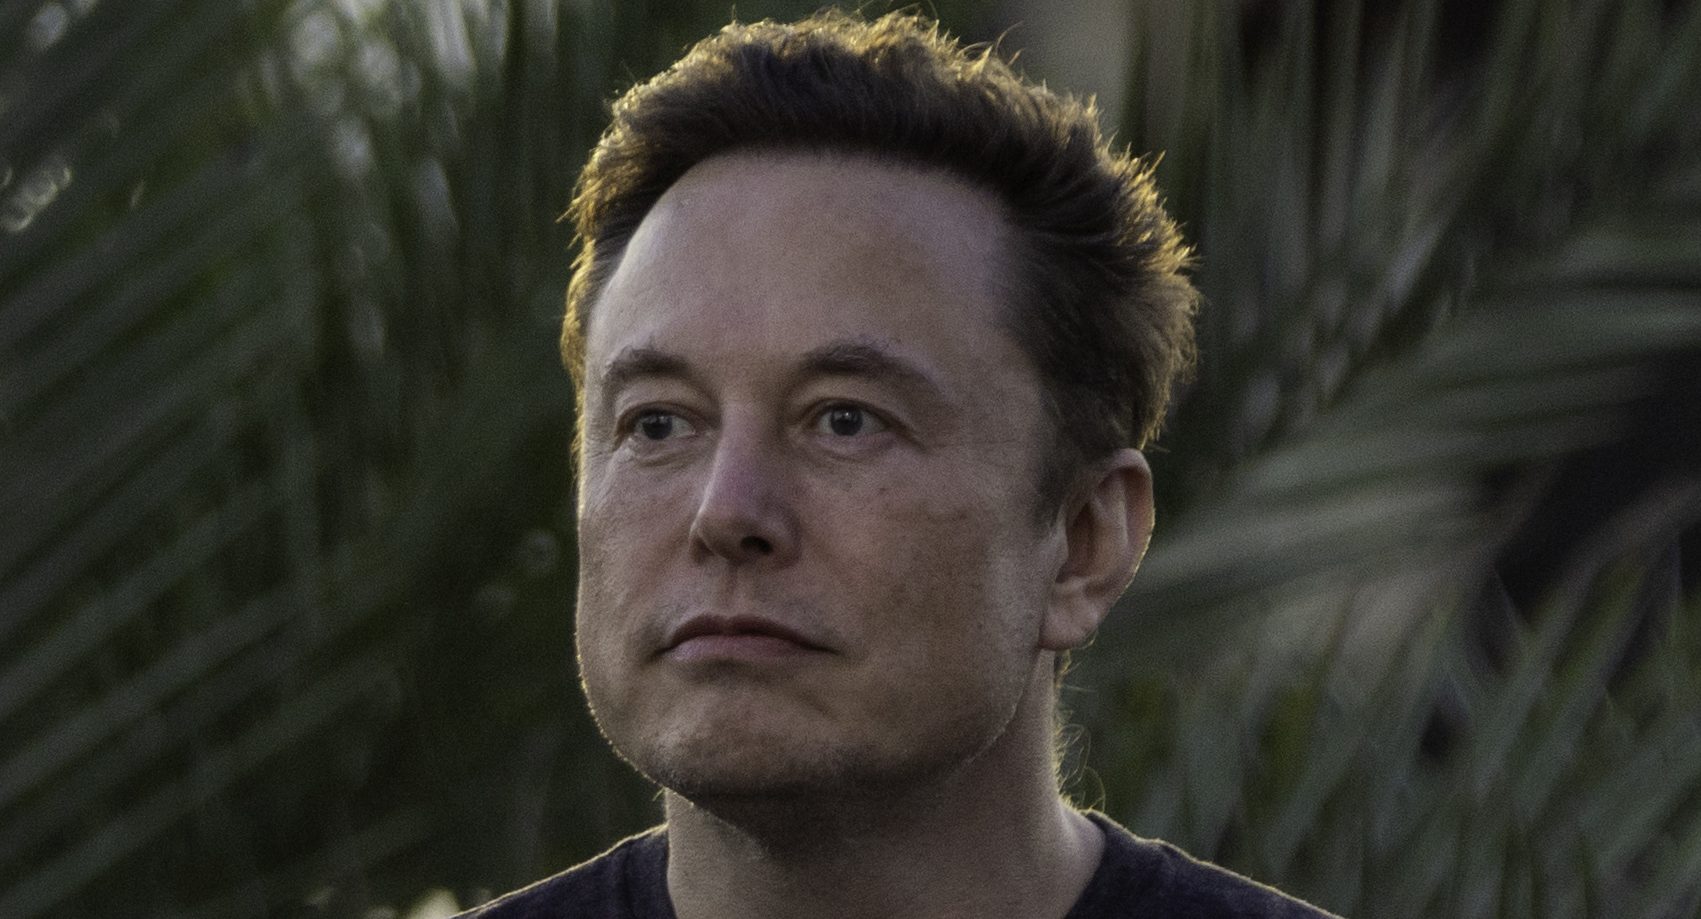 Elon Musk Is The First Person Ever To Lose $200 Billion